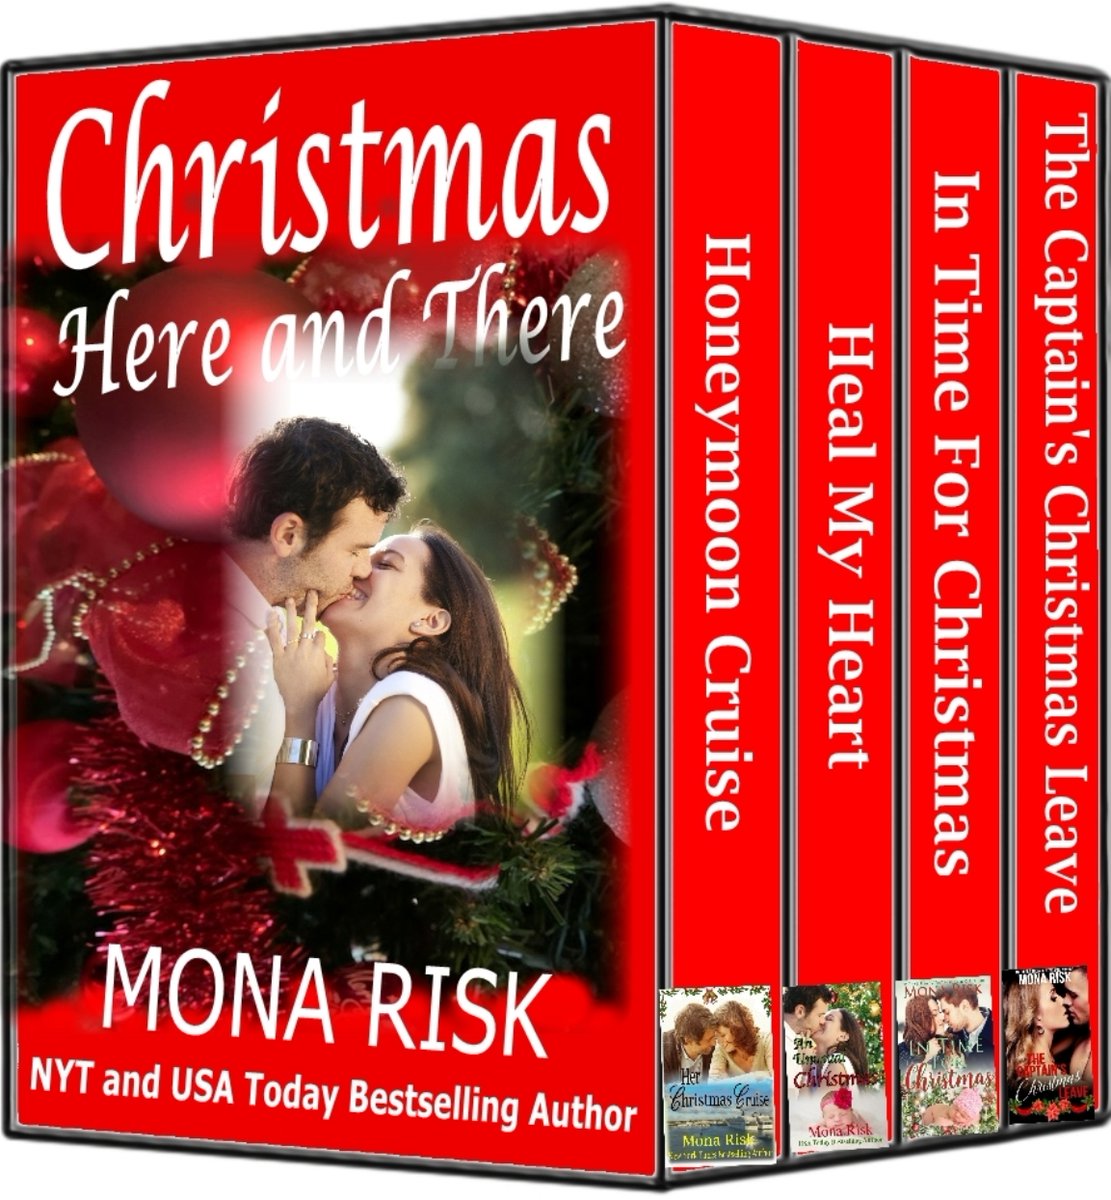 Last few days discounted to $ 0.99
CHRISTMAS HERE AND THERE
amazon.com/Christmas-Ther…
#mgtab #ChristmasWeLove #RomanceReaders @mimisgang1 #Free in KU @gr8authors